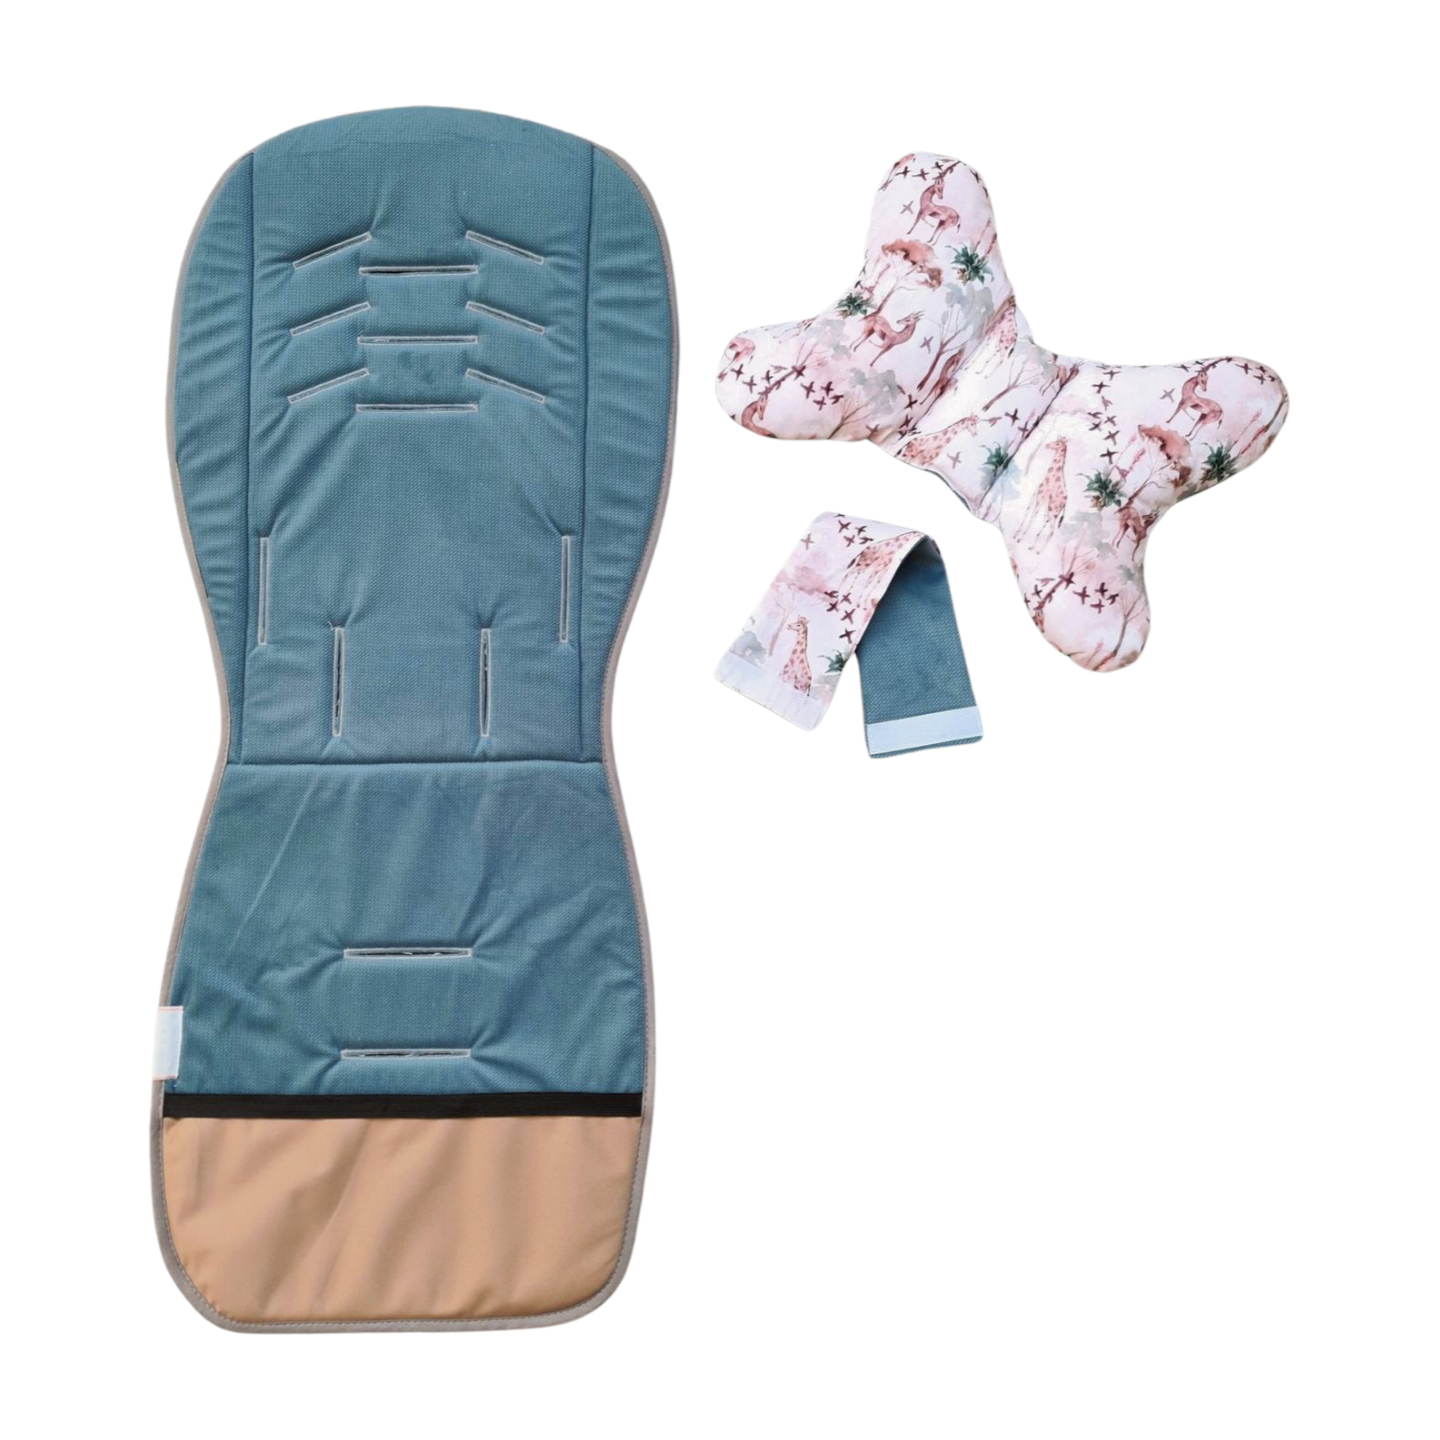 most popular liners for strollers with soft padding pillow included